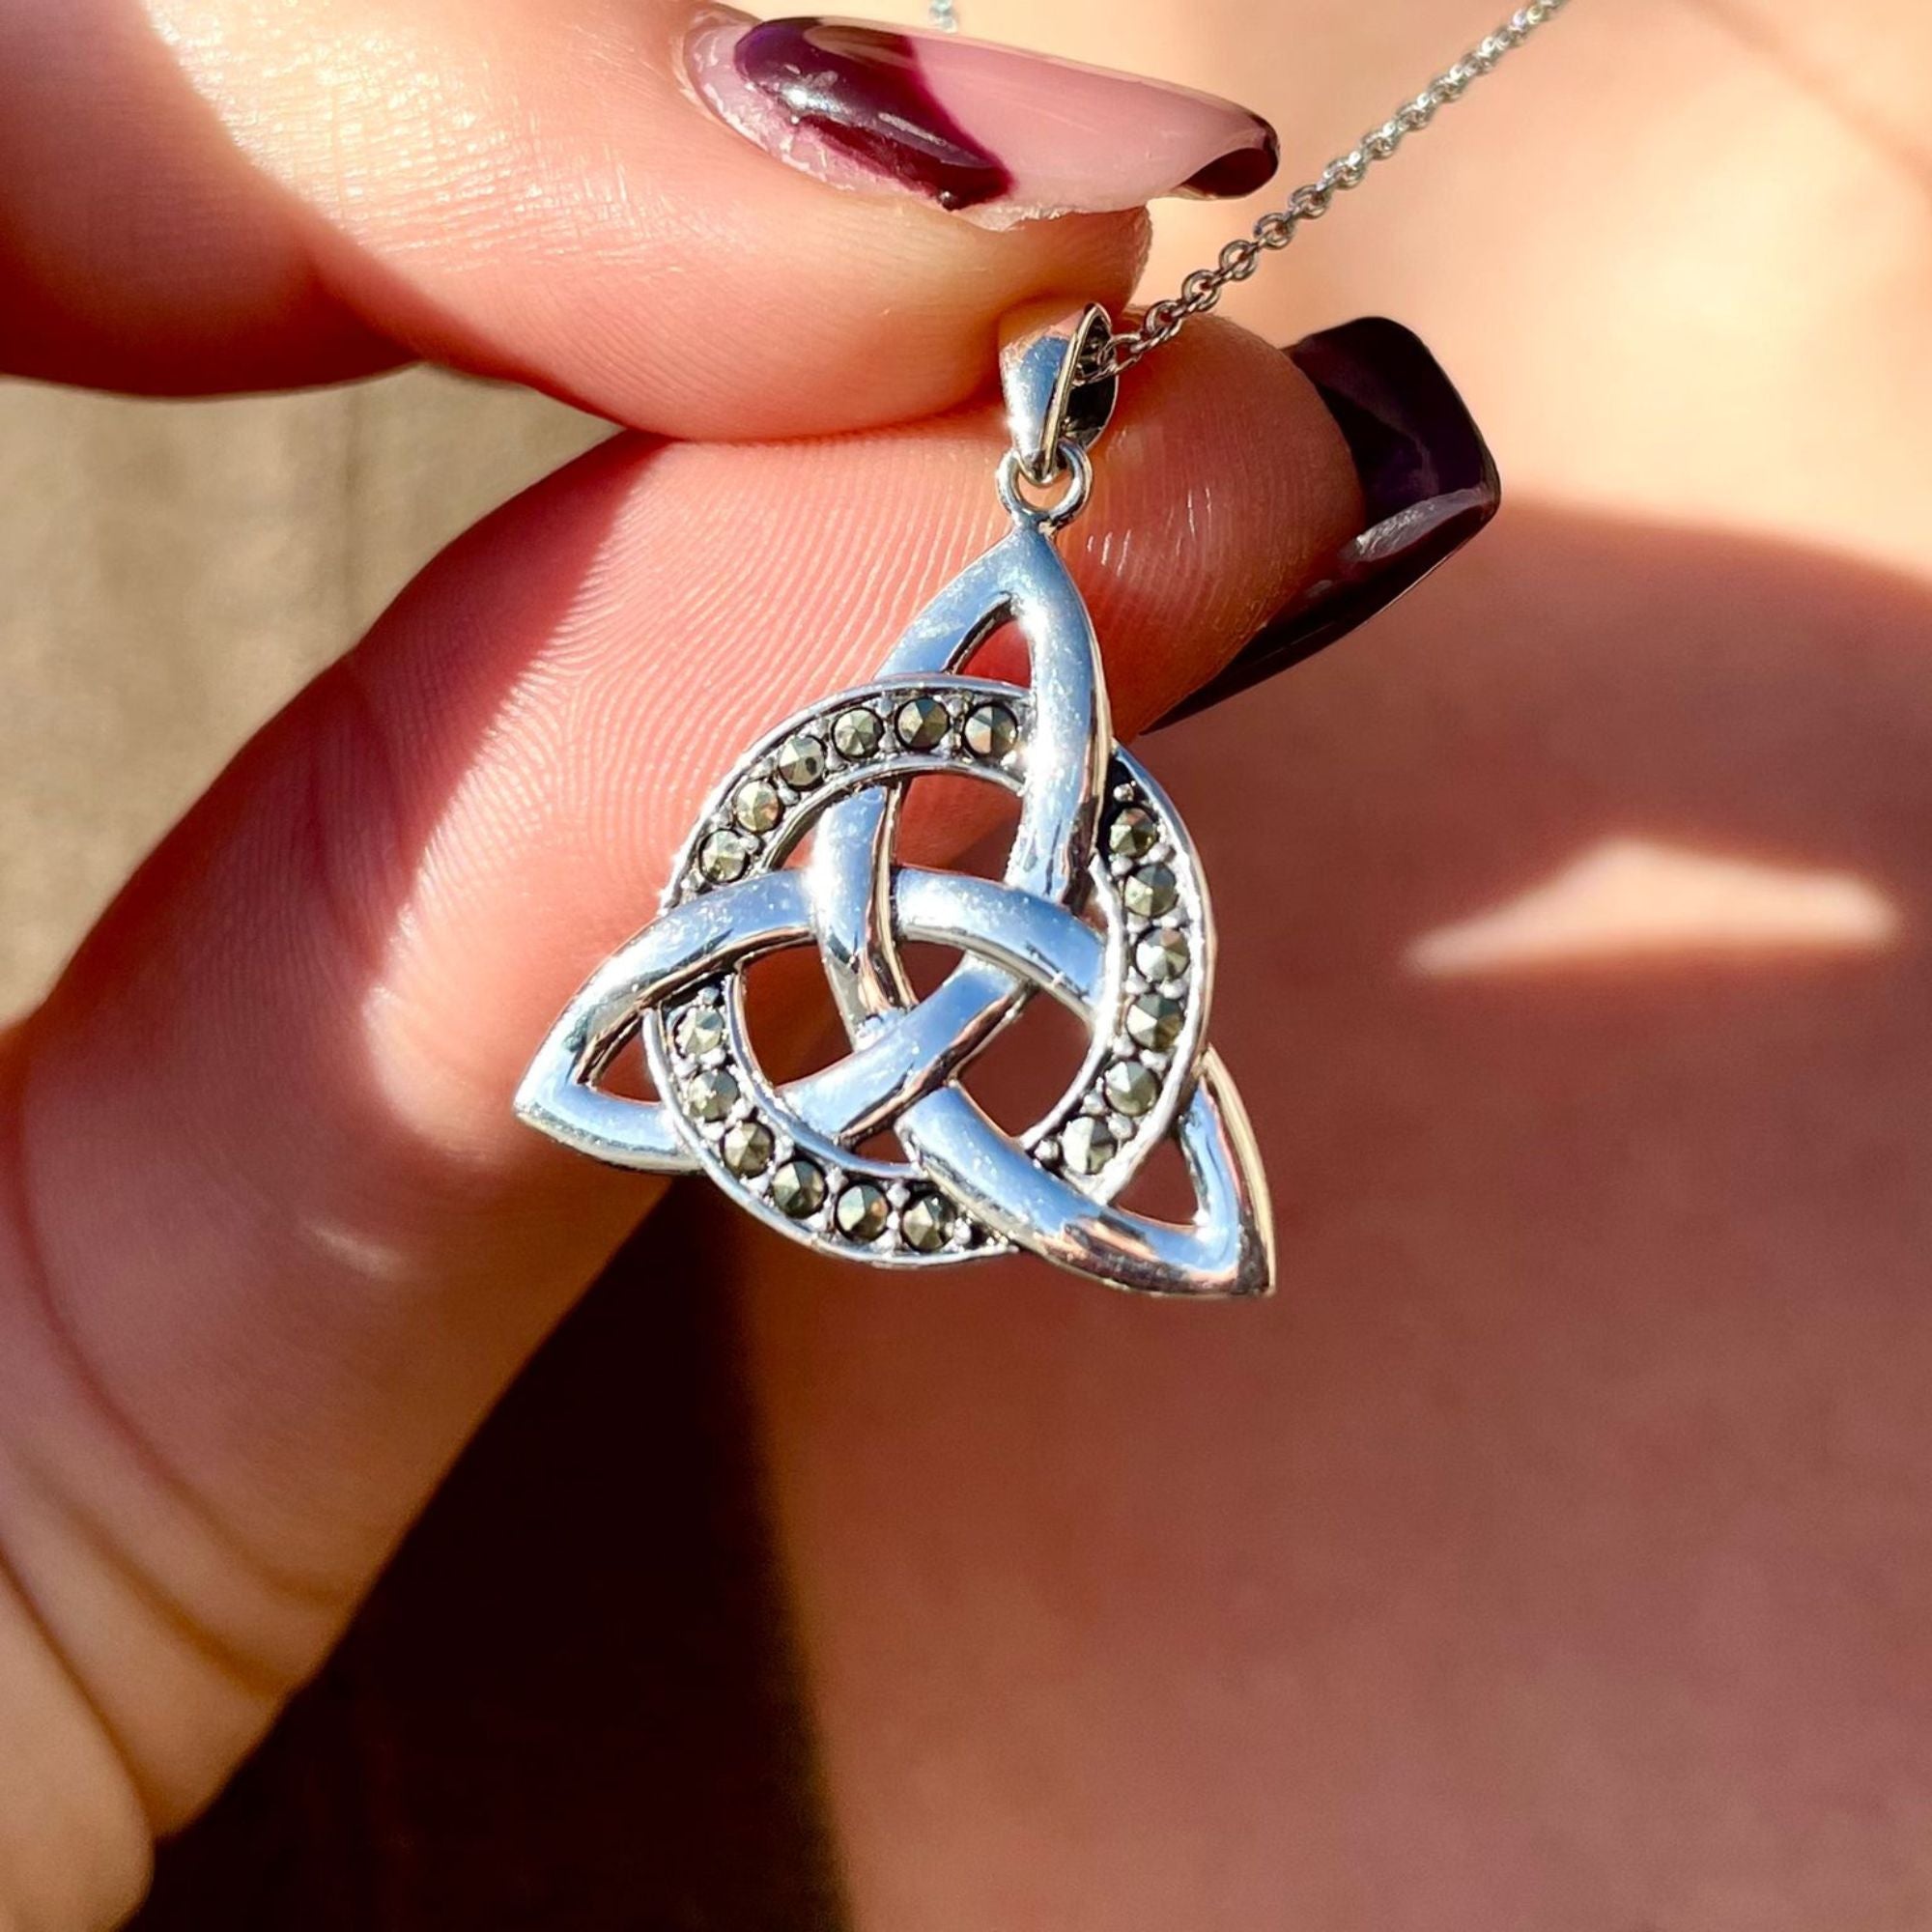 Silver Trinity Knot Pendant with Marcasite Stones